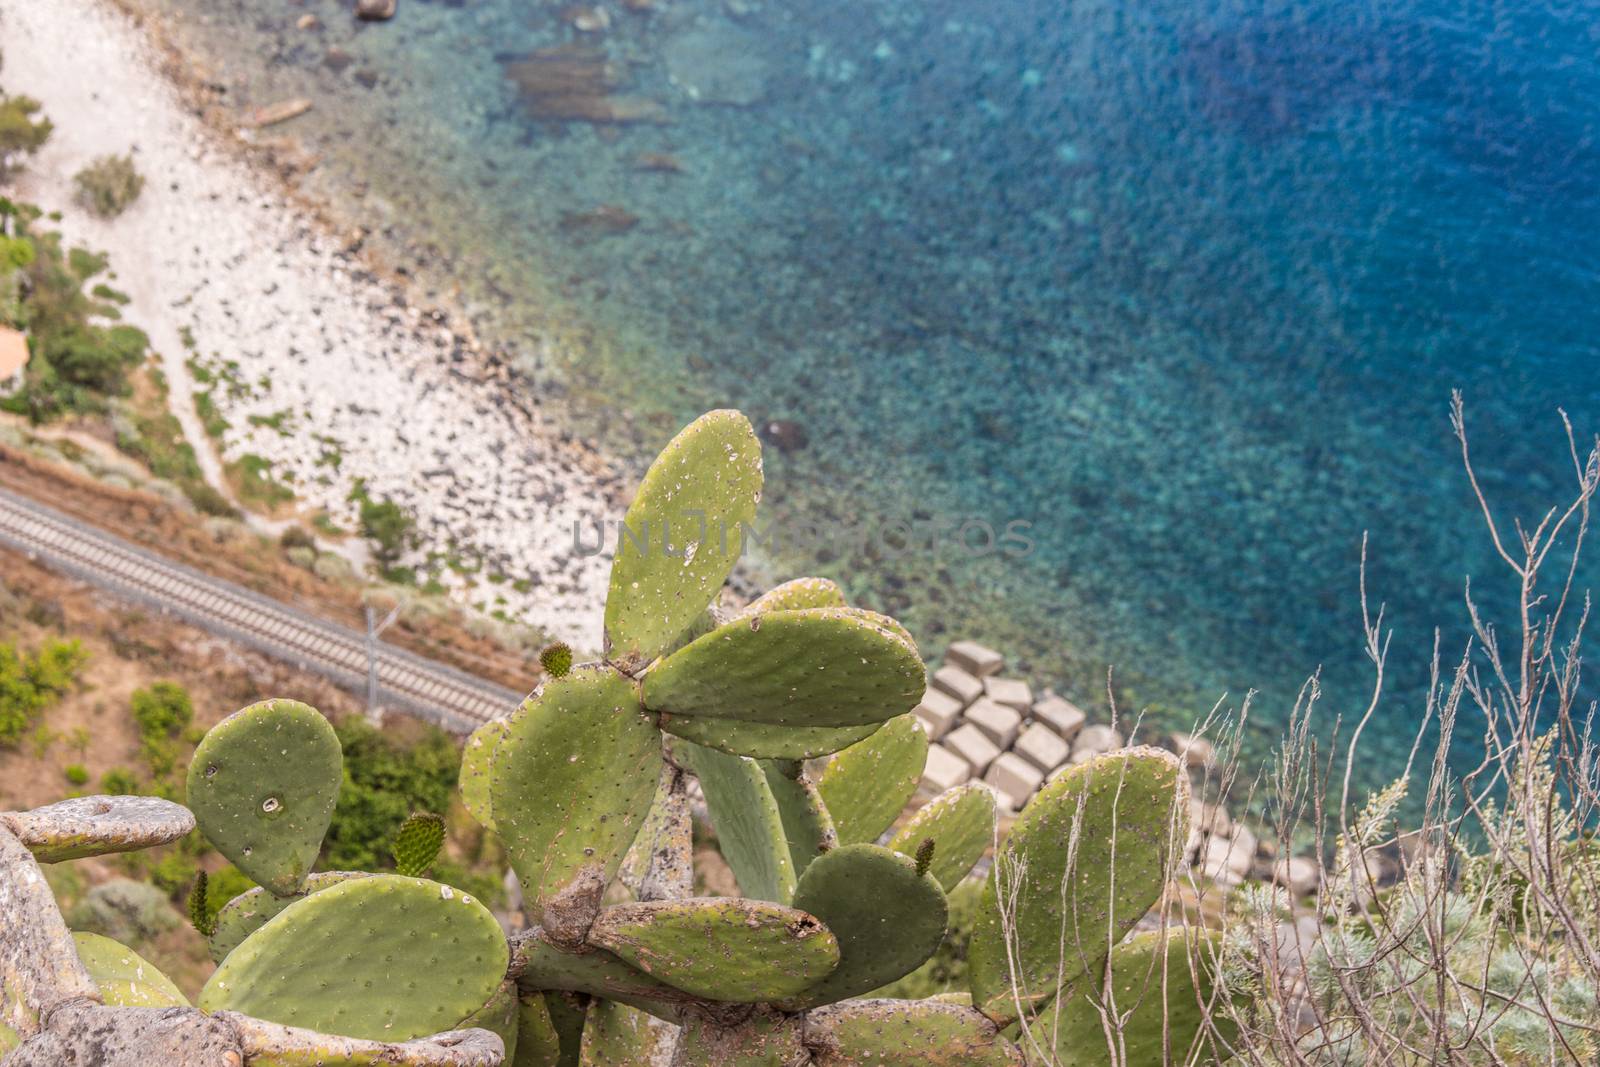 Opuntia ficus-indica and blue mediterranean sea on the background, Italy